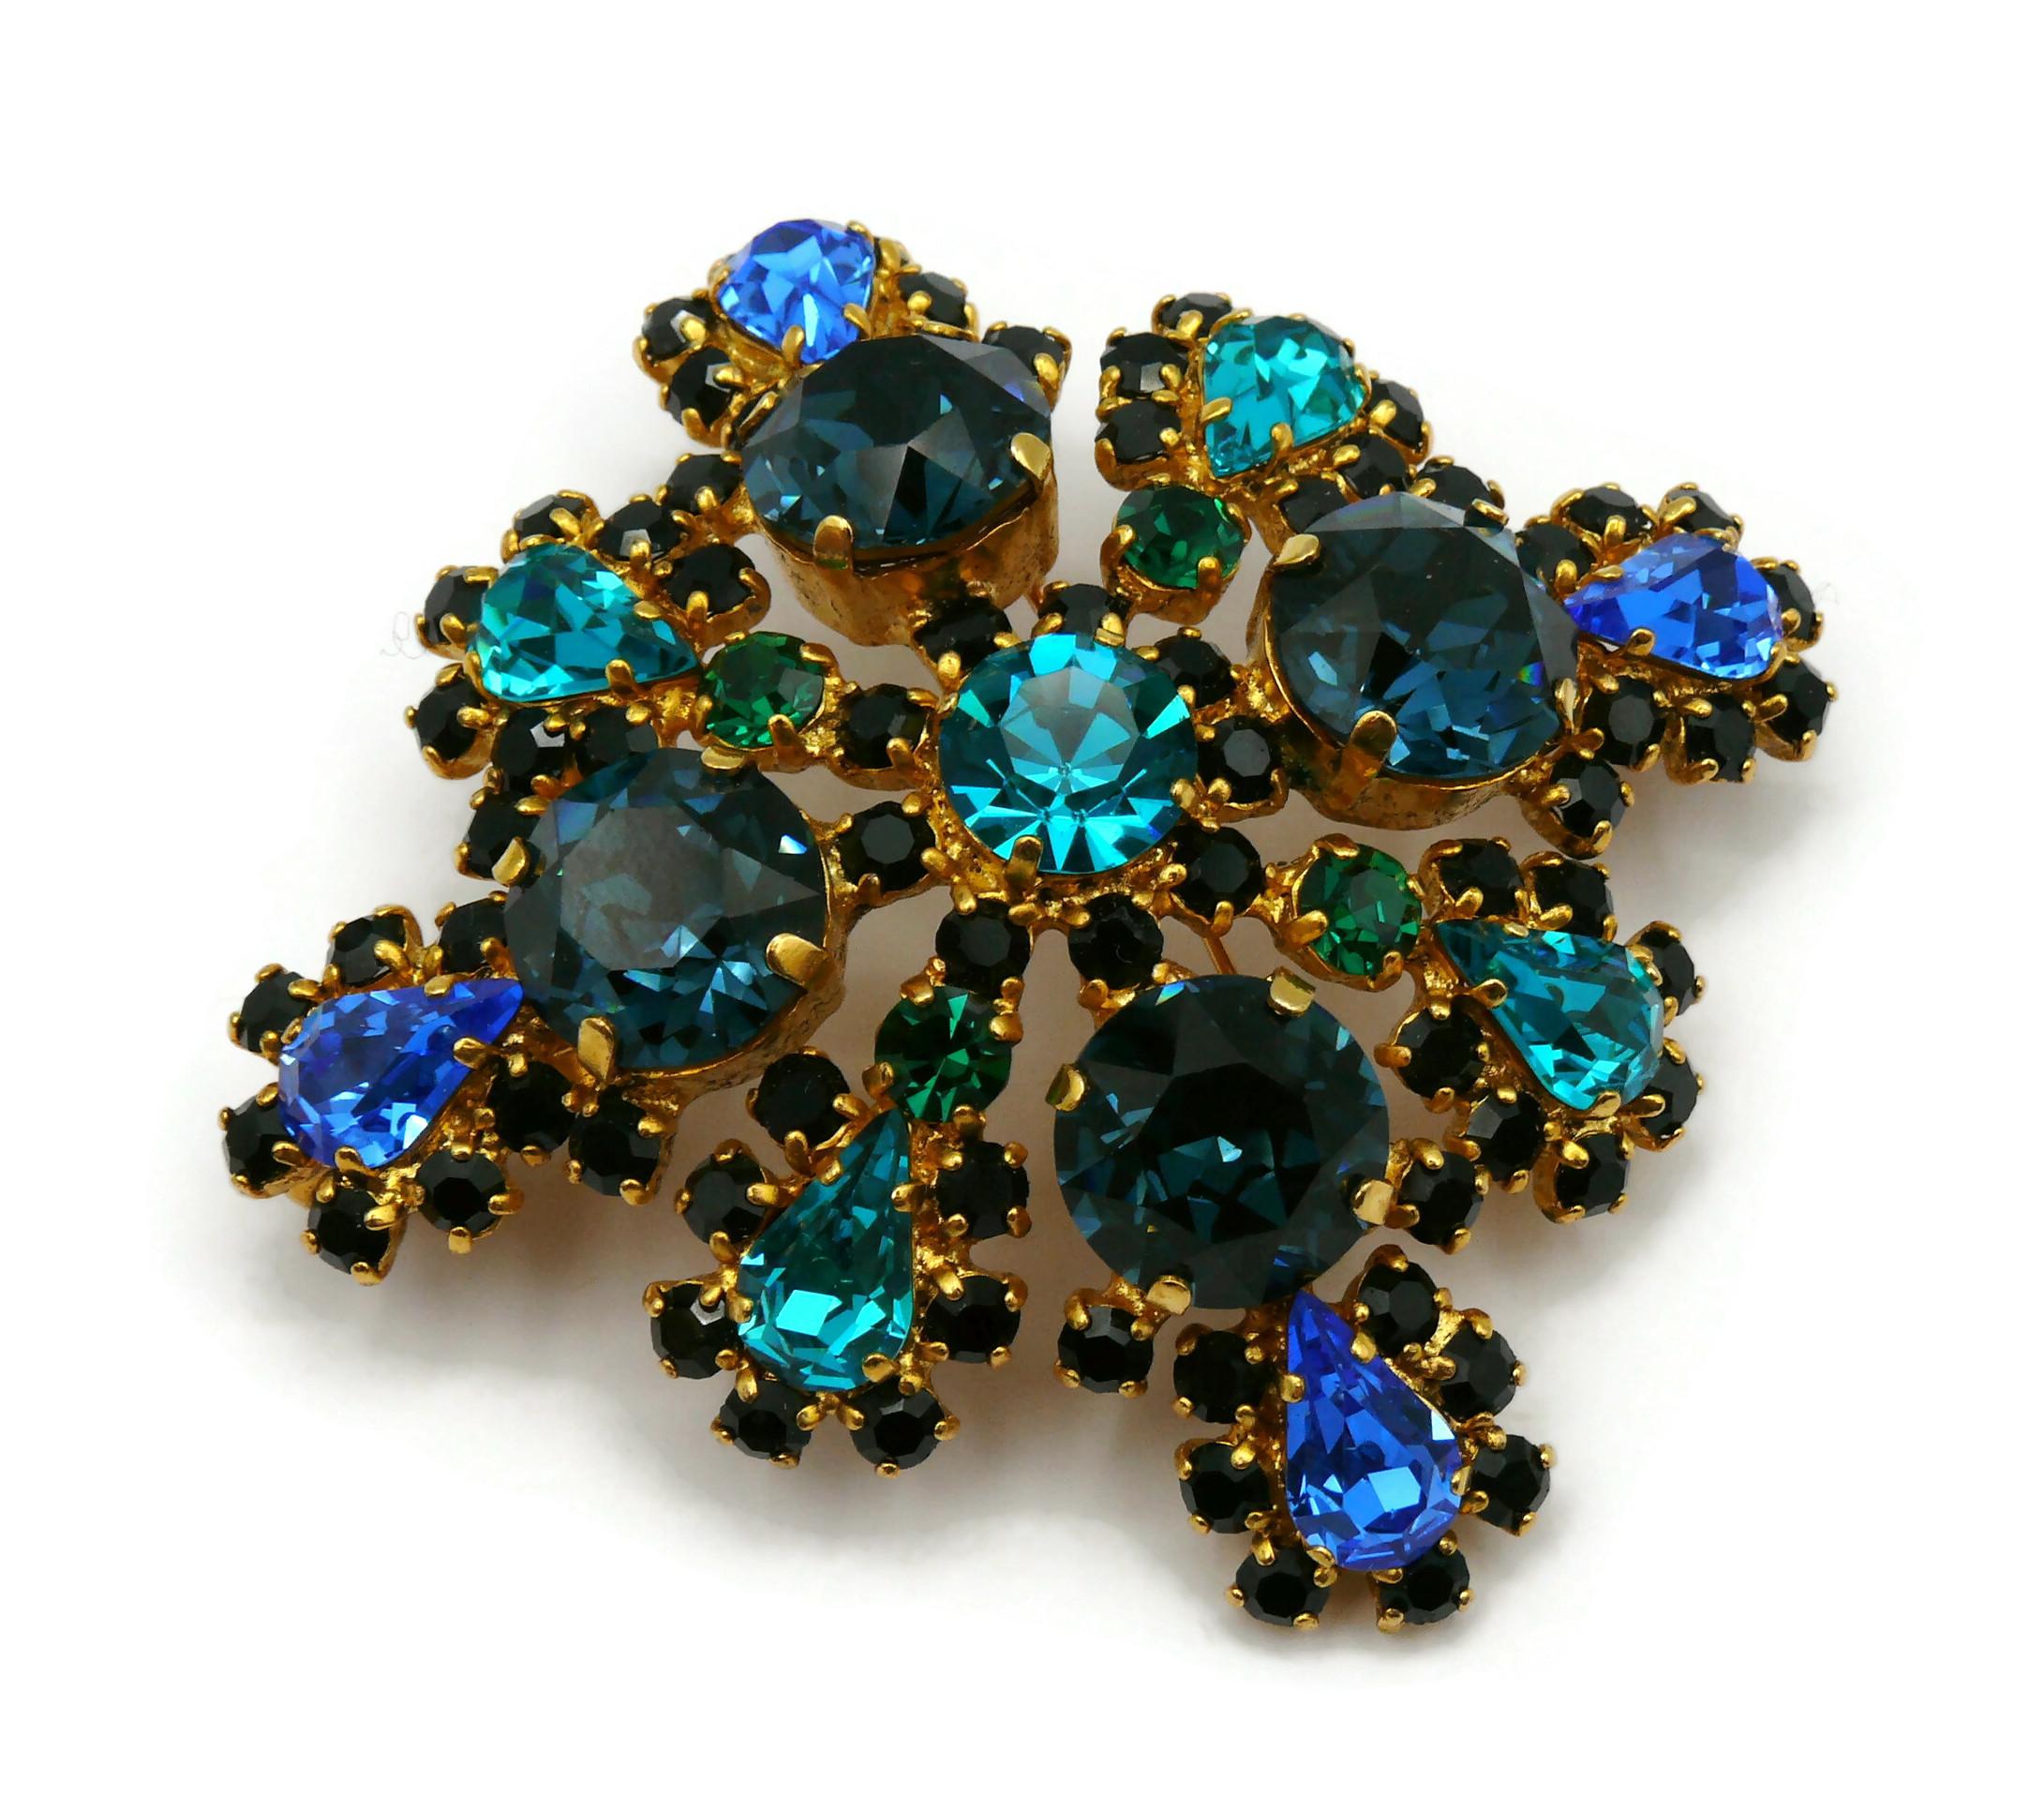 CHRISTIAN DIOR by GIANFRANCO FERRE Vintage Massive Jewelled Brooch Pendant For Sale 5